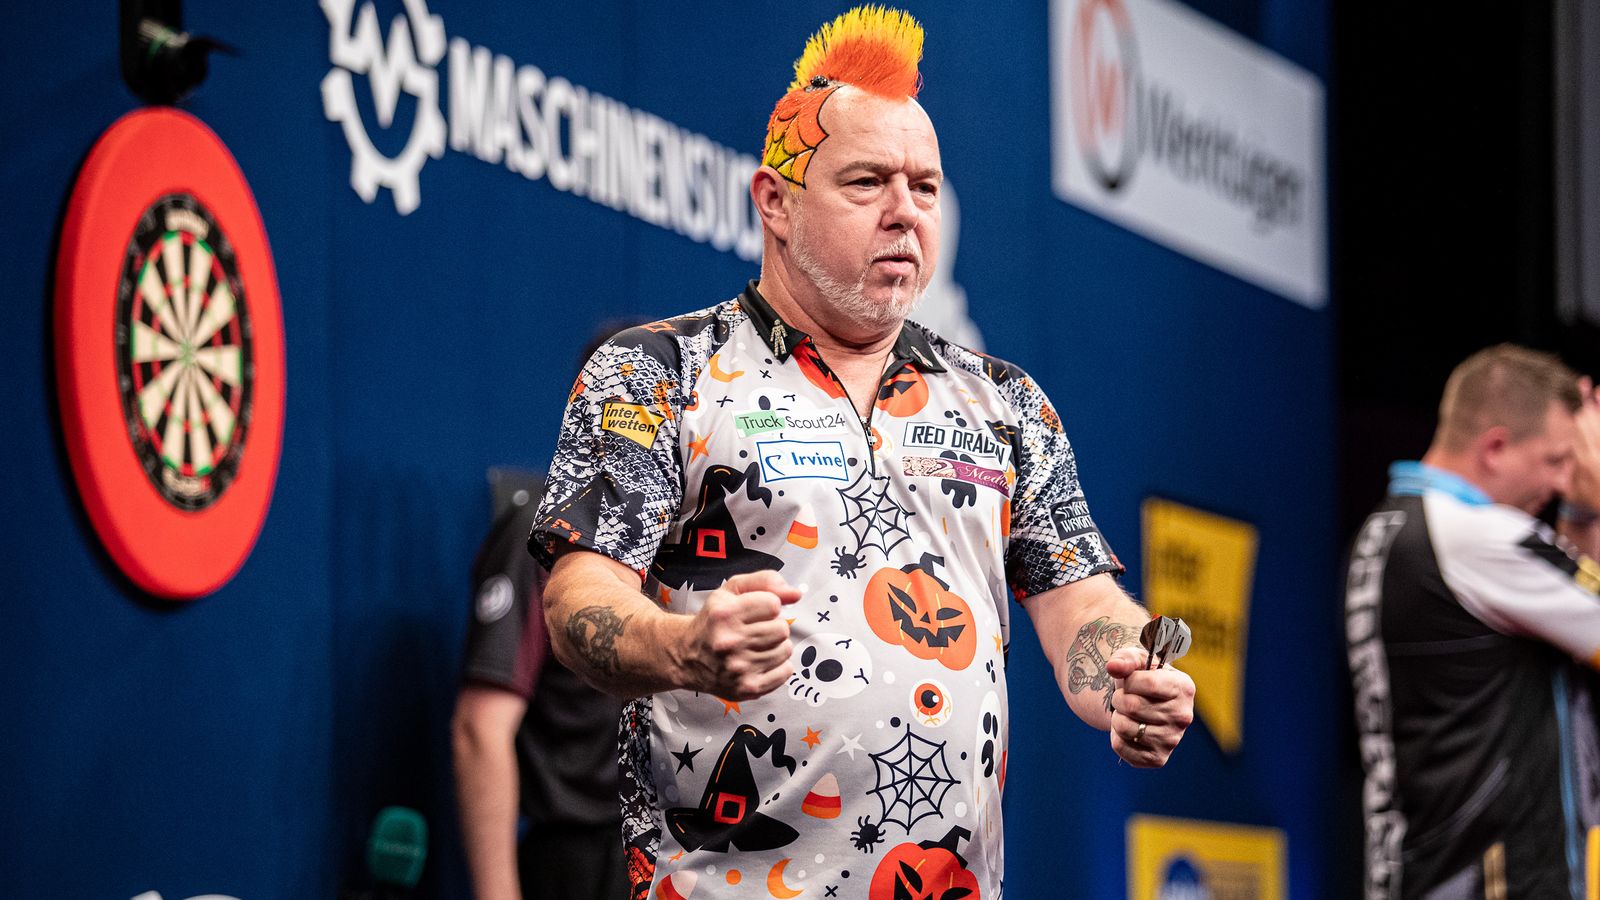 Peter Wright shows glimpses of a resurgence as he targets a strong end to the darting year | Darts News